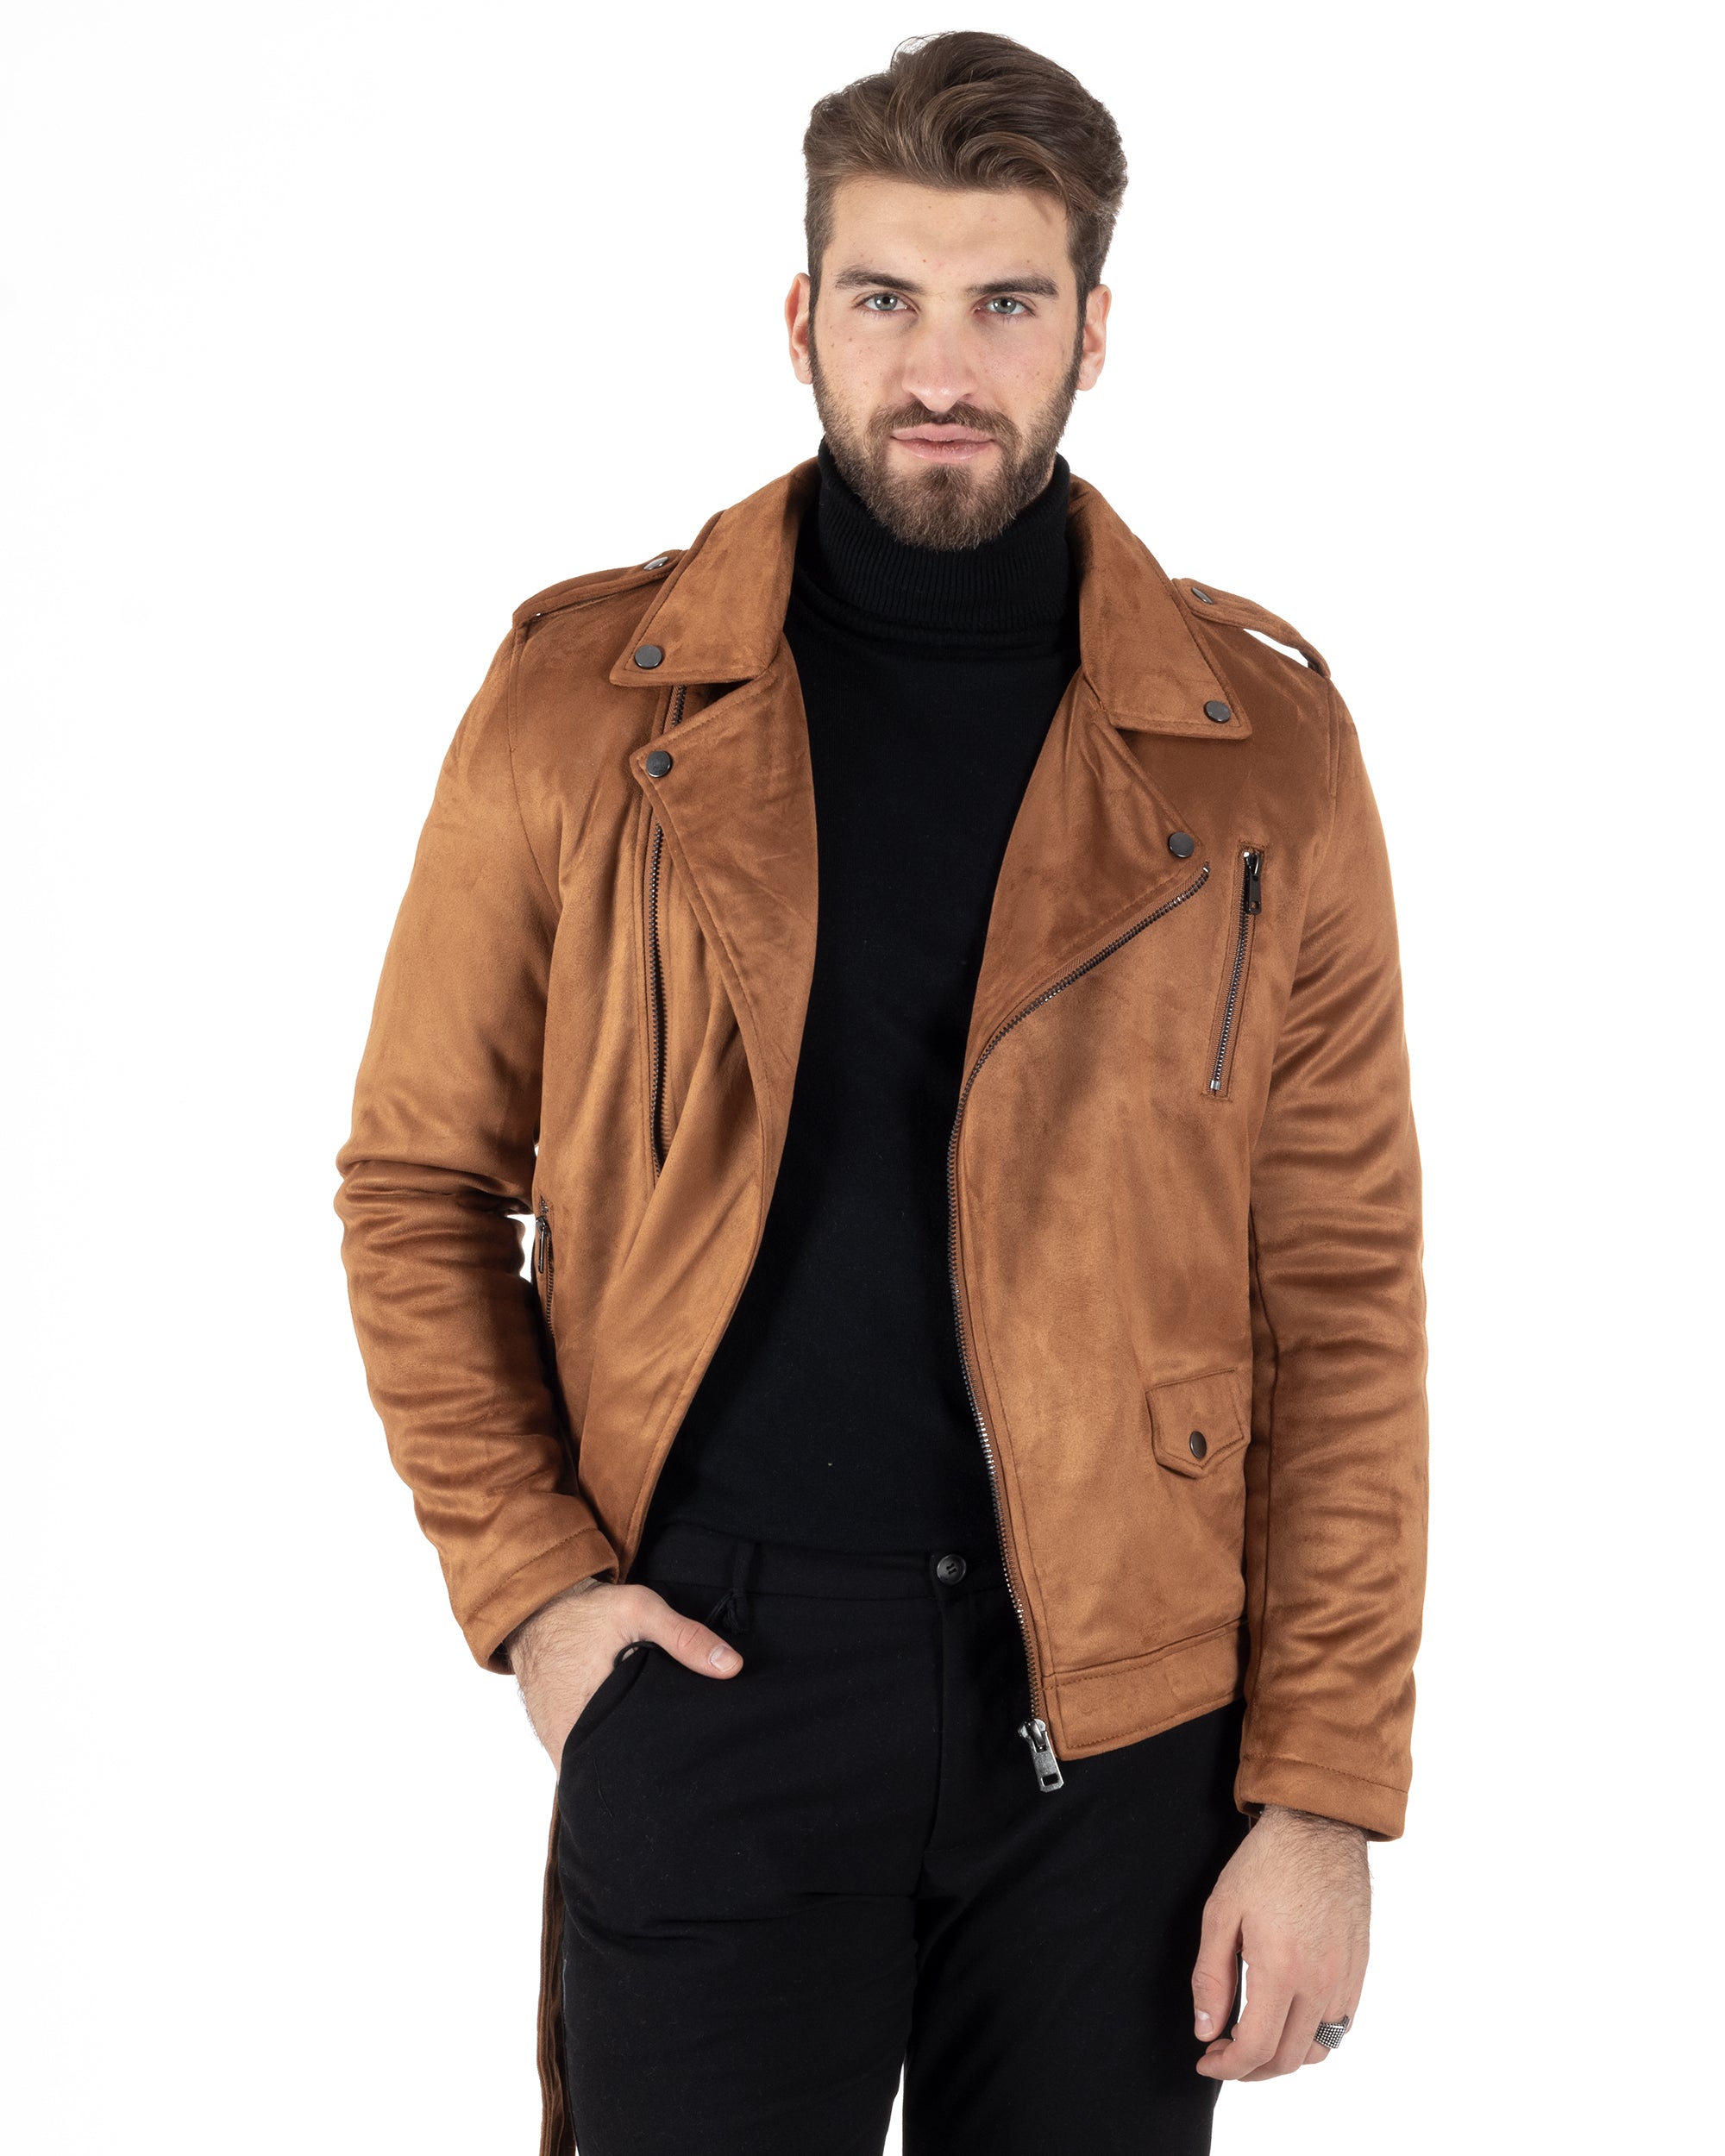 Men's Camel Jacket Solid Color Long Sleeves Suede Studded GIOSAL